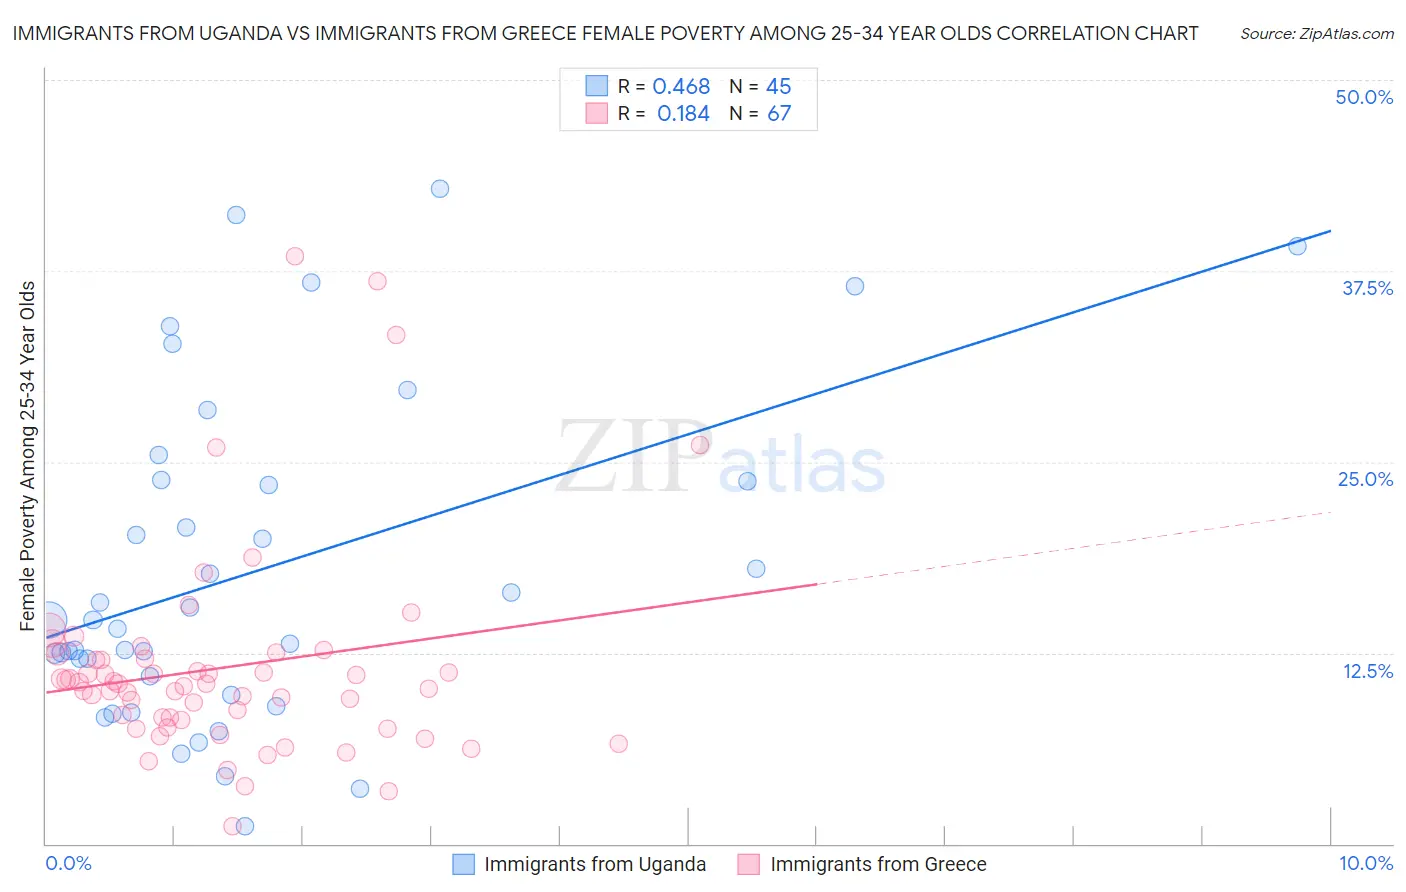 Immigrants from Uganda vs Immigrants from Greece Female Poverty Among 25-34 Year Olds